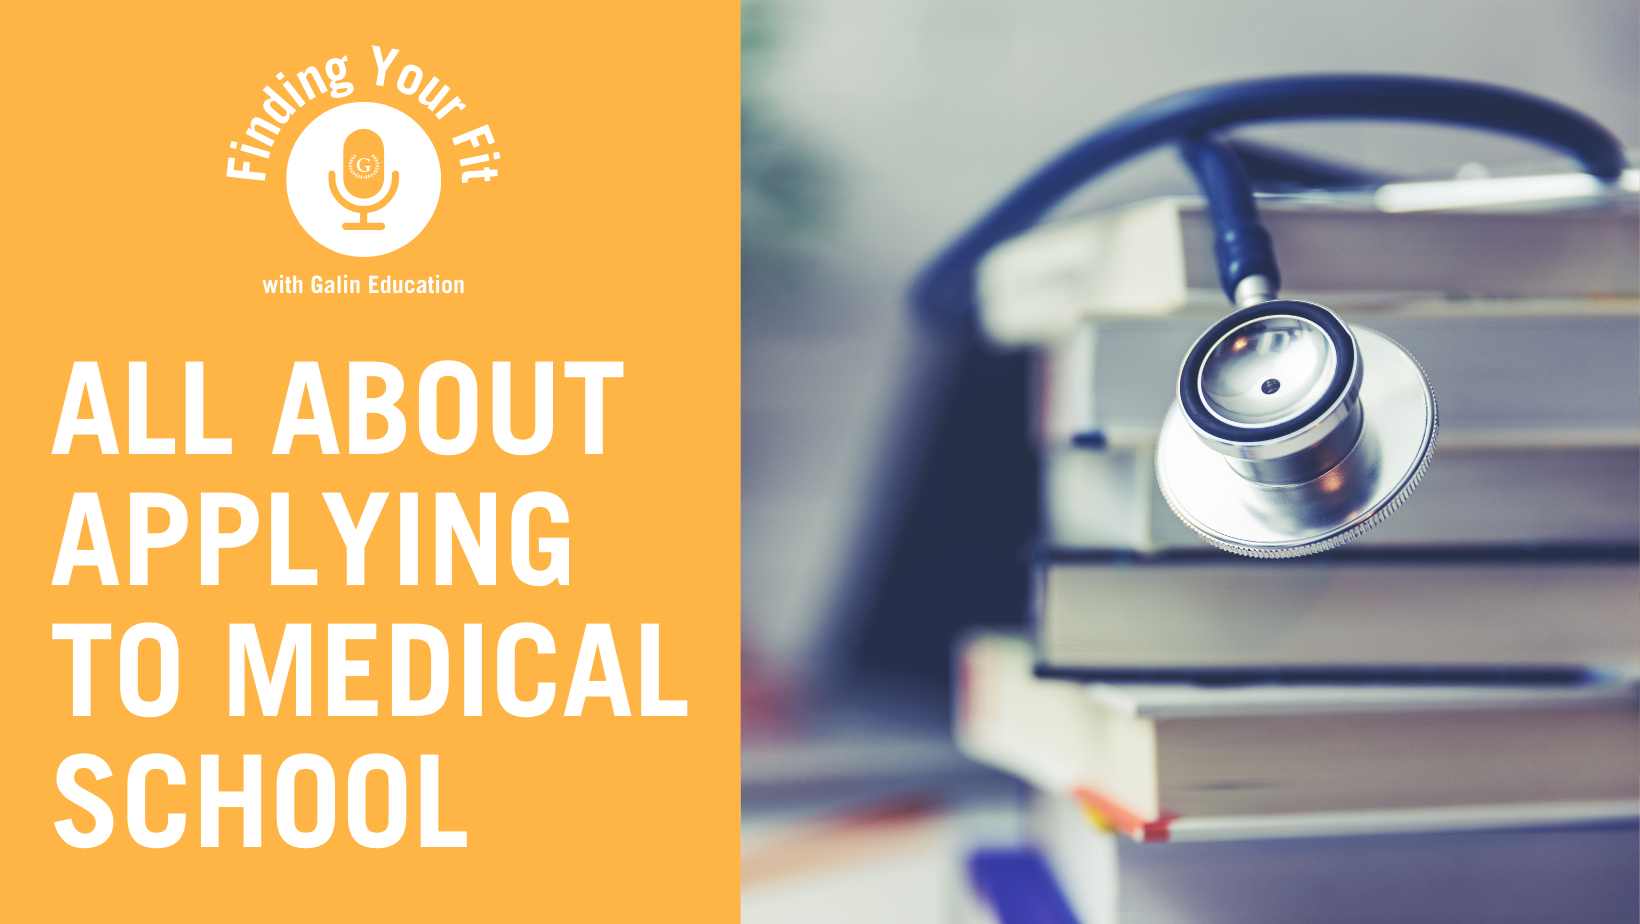 Finding Your Fit: All About Applying to Medical School